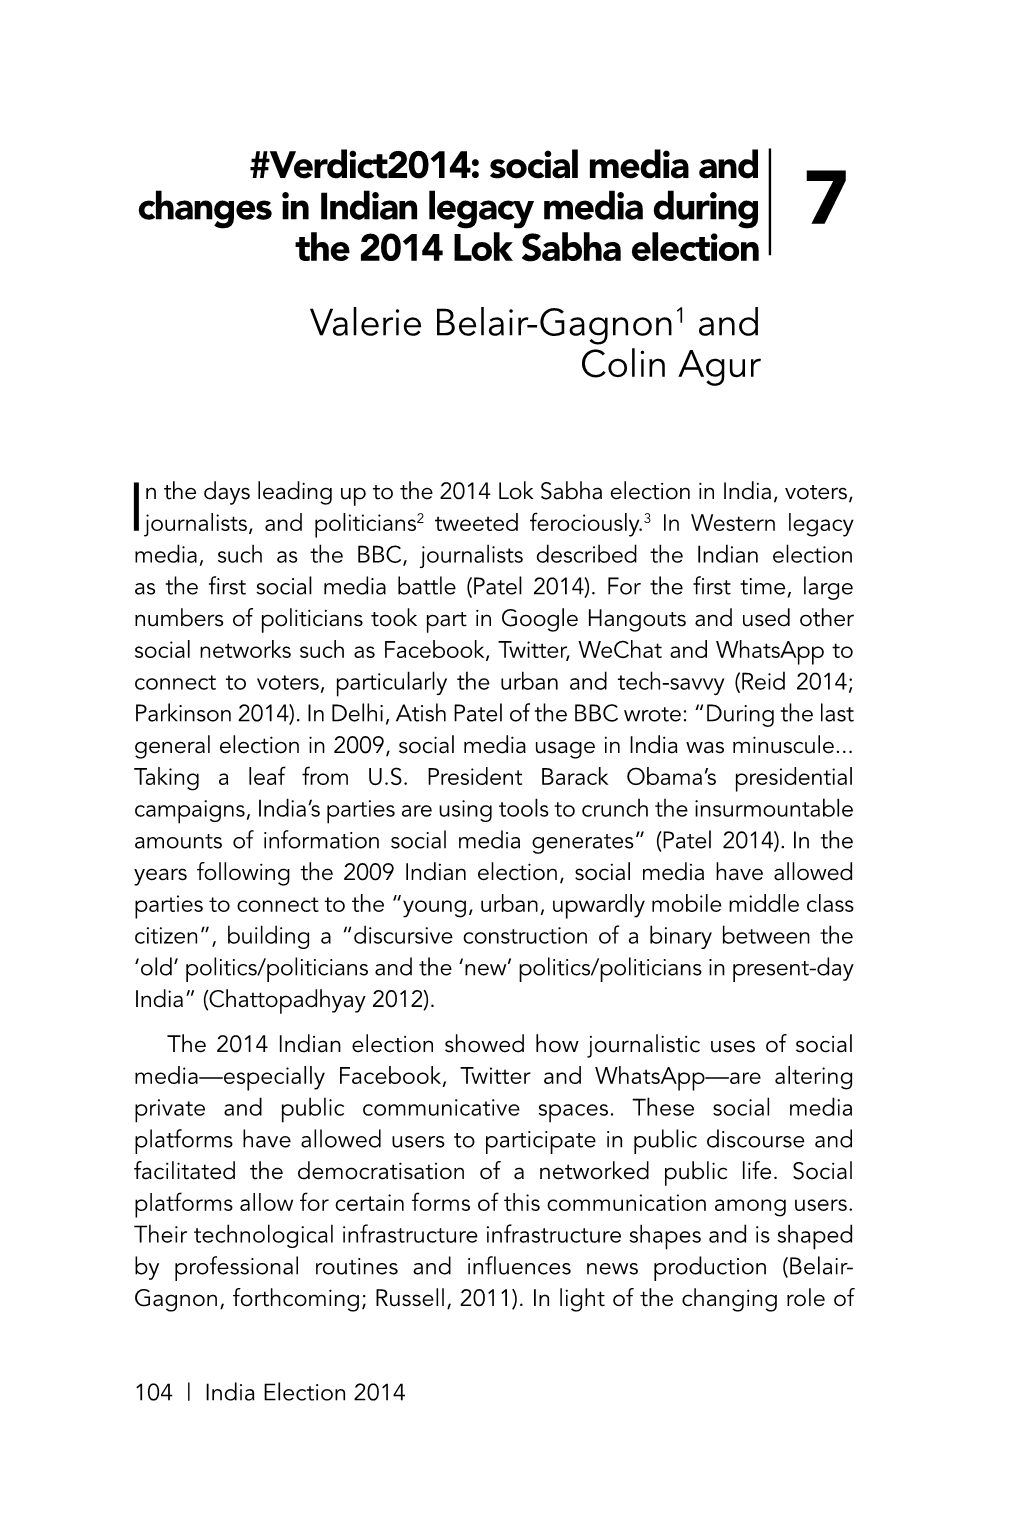 Verdict2014: Social Media and Changes in Indian Legacy Media During the 2014 Lok Sabha Election Valerie Belair-Gagnon1 and Coli